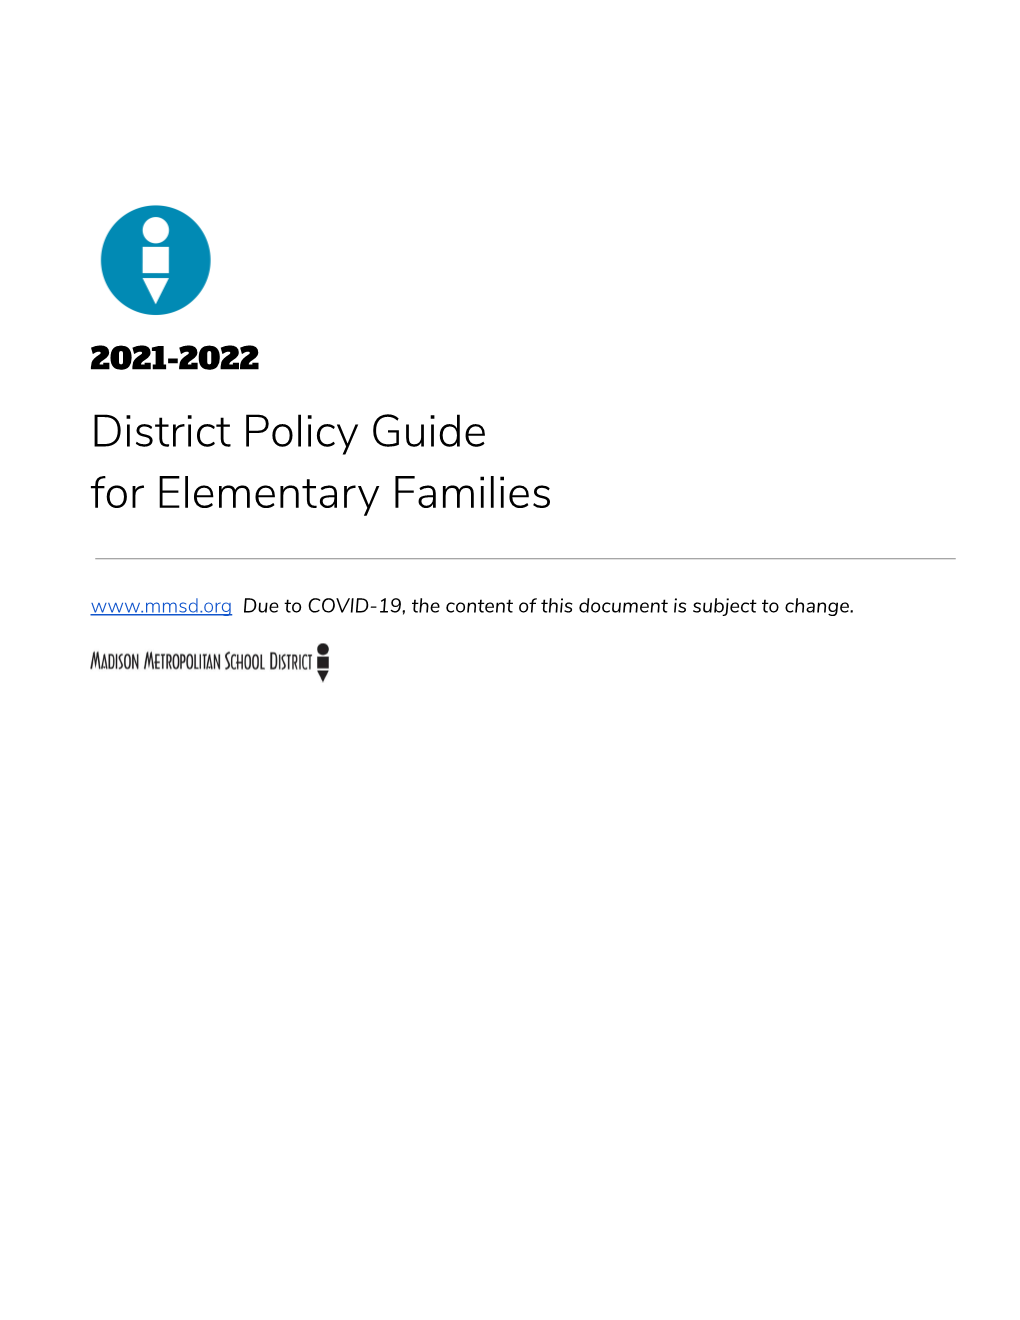 District Policy Guide for Elementary Families 2019-2020